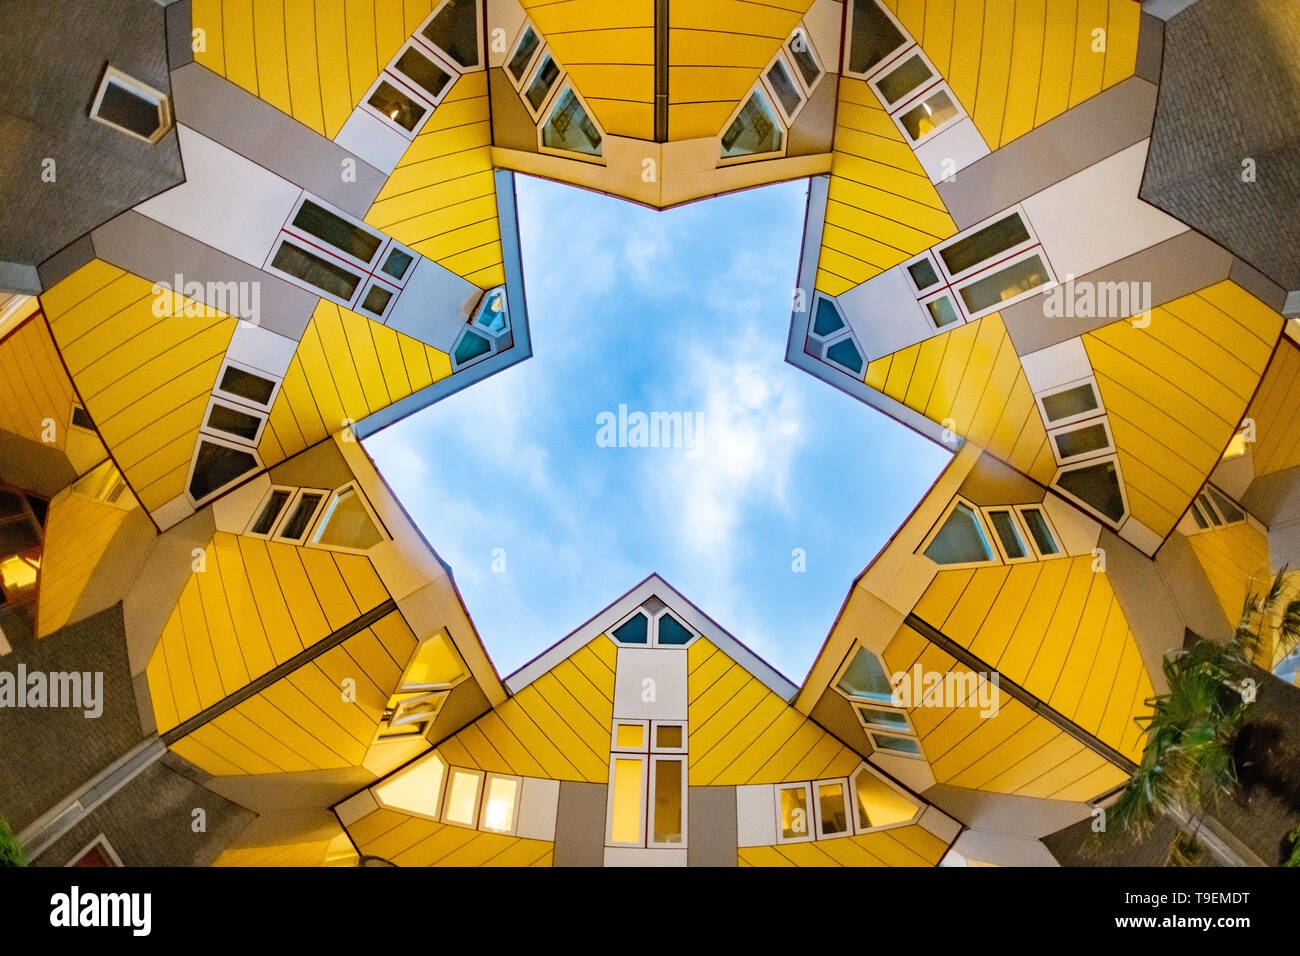 Cube houses Rotterdam - Piet Blom architect - modern architecture - abstract photography - abstract photo - Dutch tourism Netherlands tourism Stock Photo